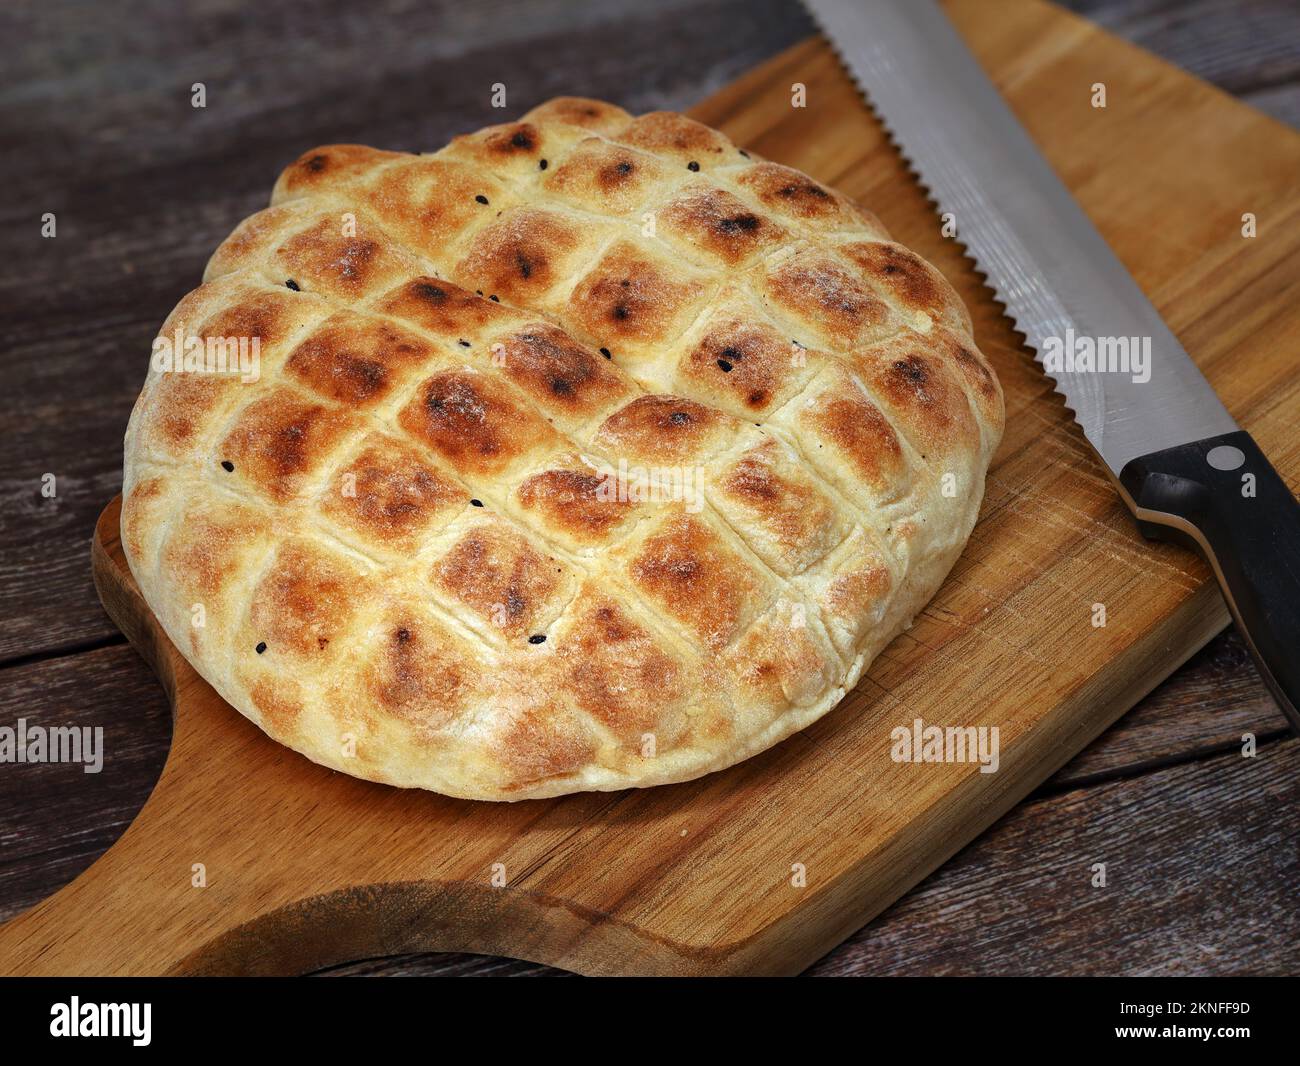 turkish flatbread with black cumin on wooden cutting board with bread knife, round wheat bread for doner kebab Stock Photo